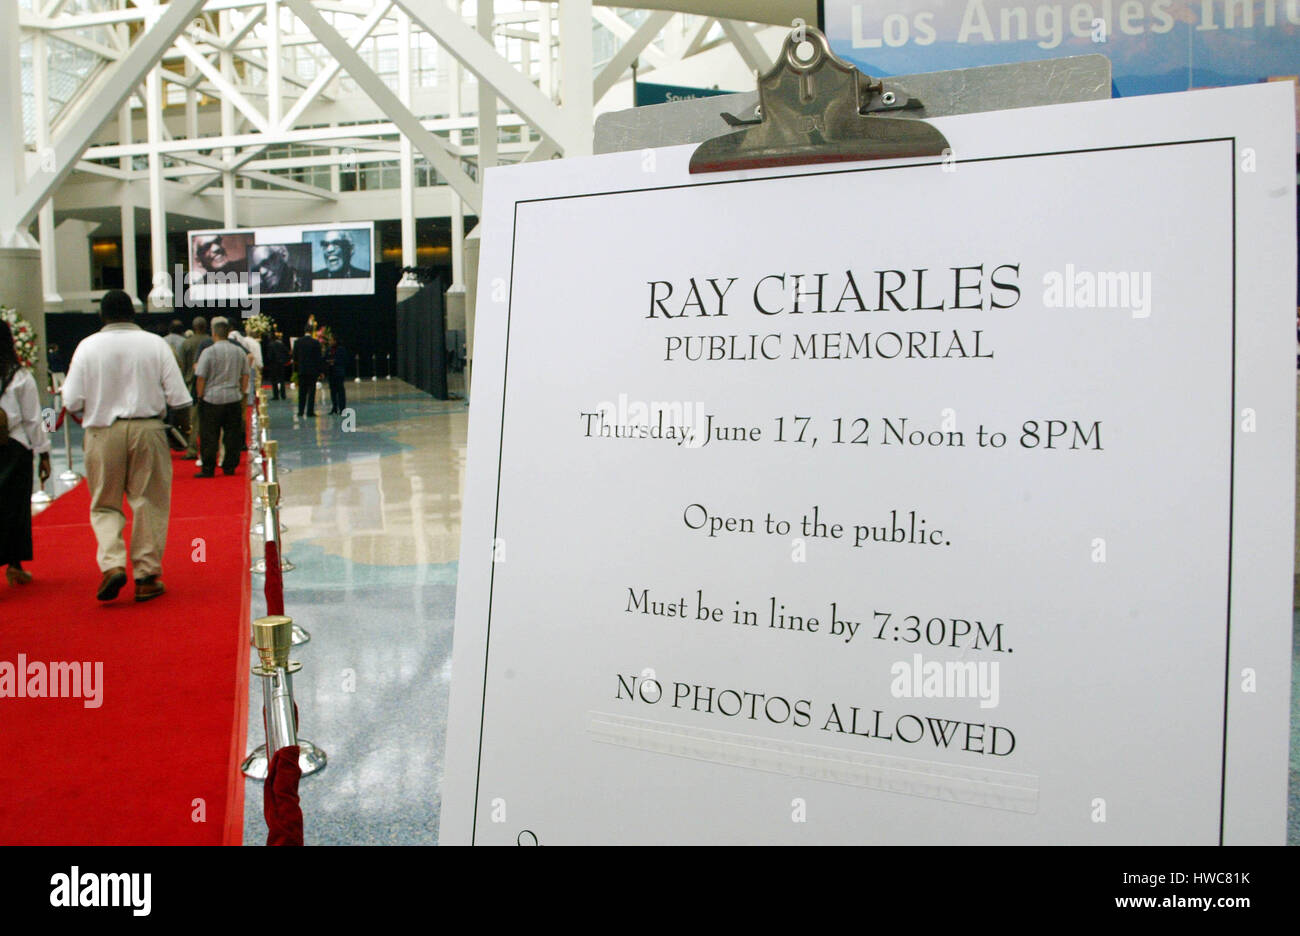 Mourners line-up to view the casket of singer Ray Charles at the Los  Angeles Conventioin Center in Los Angeles, California on June 17, 2004.  Photo credit: Francis Specker Stock Photo - Alamy